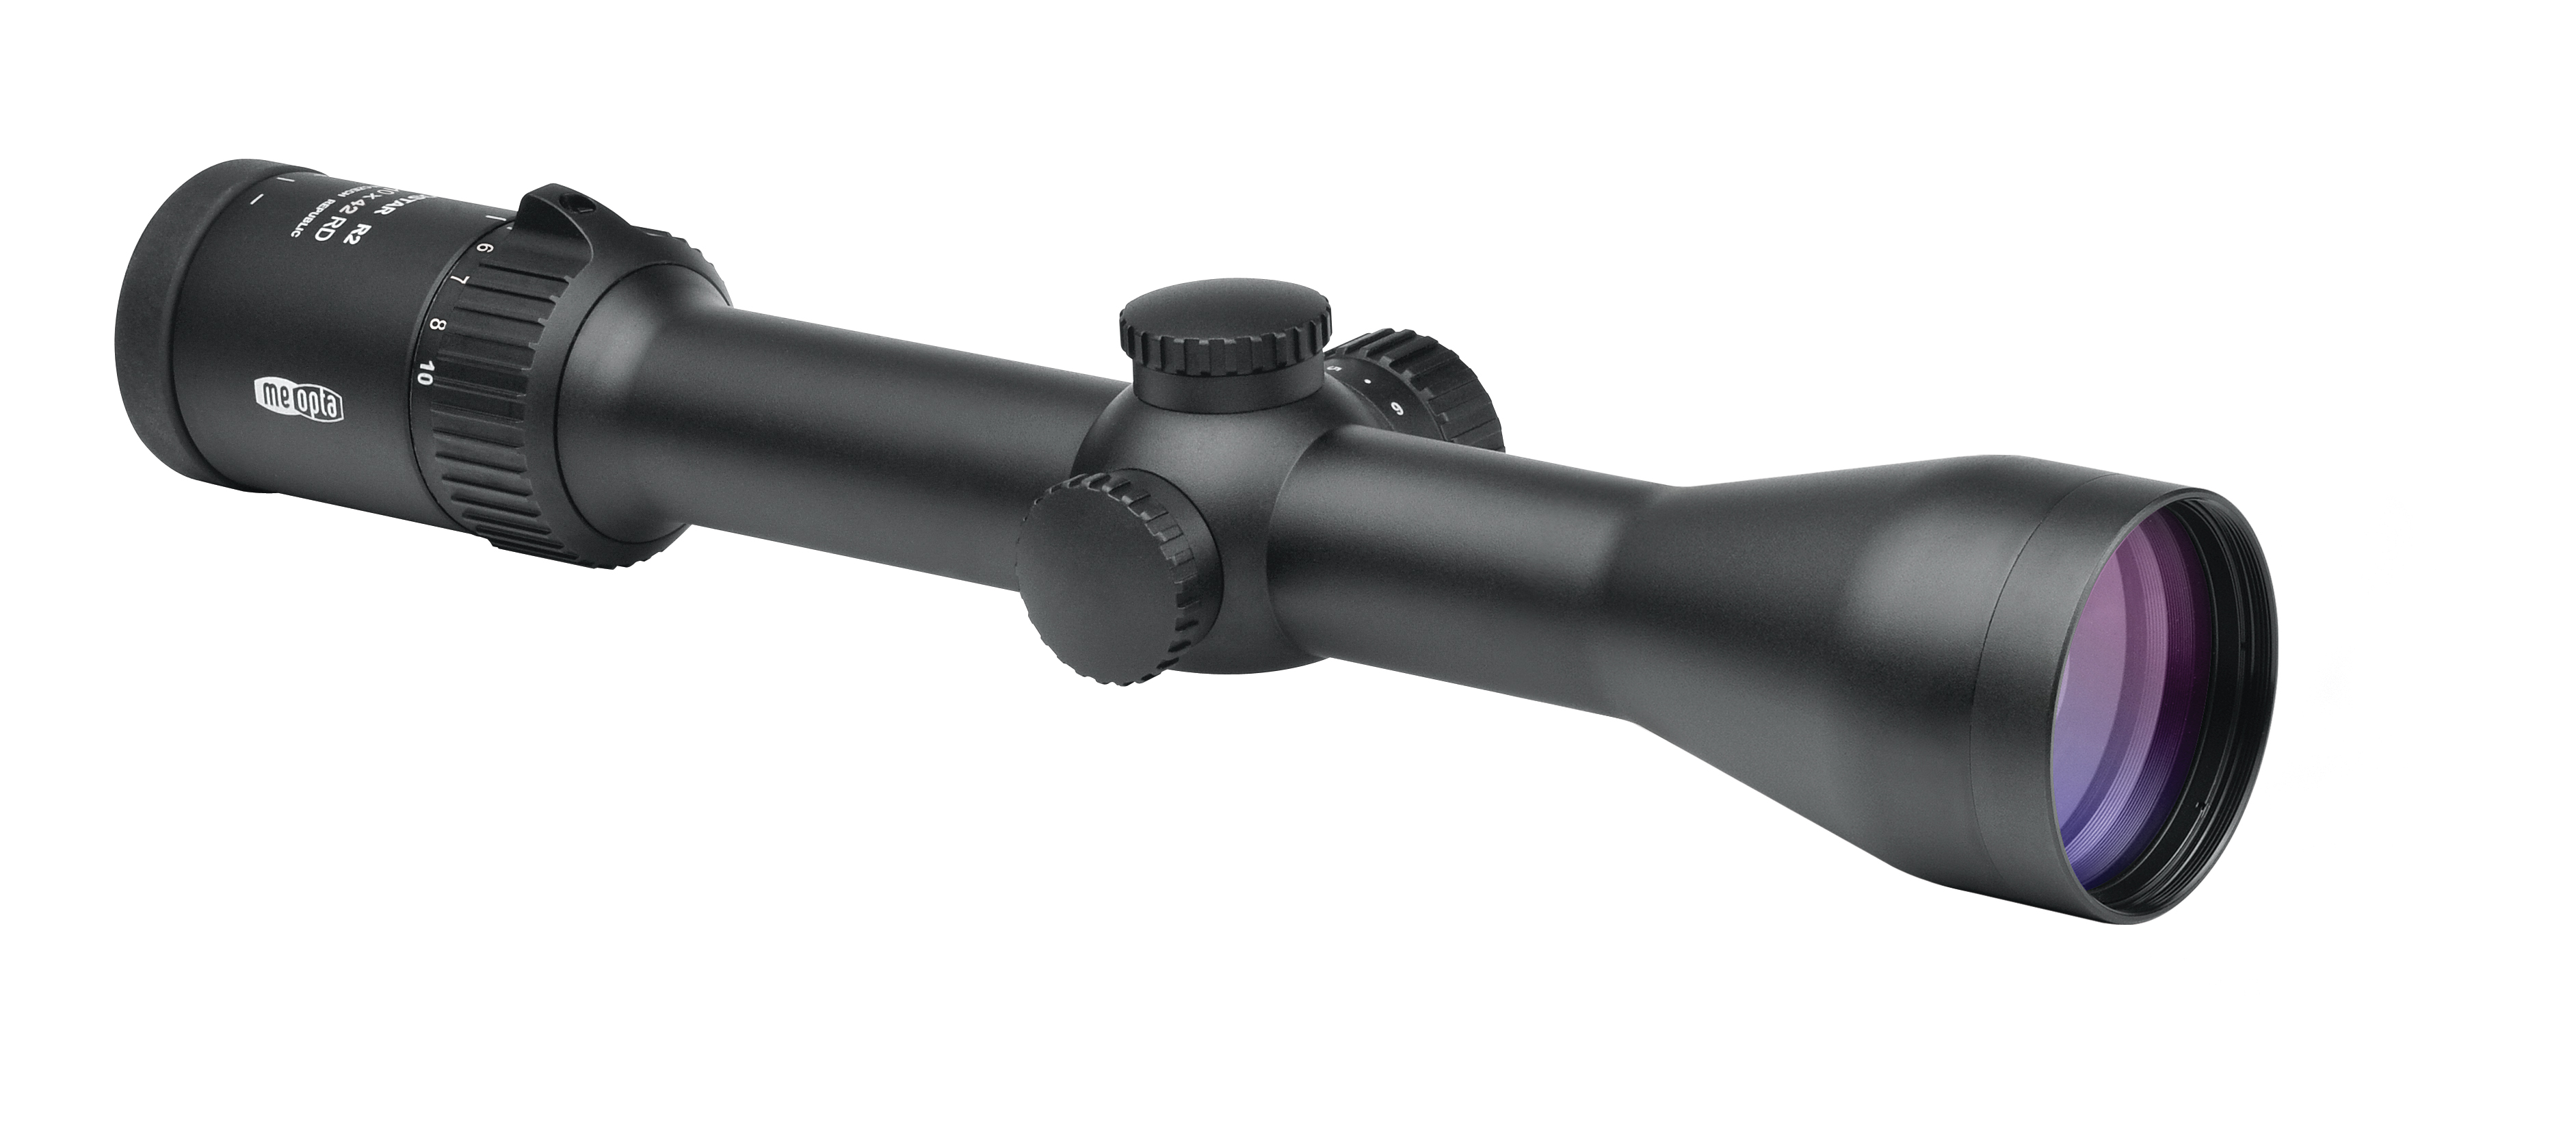 MeoStar R2 1.7-10x42 RD and 2-12x50 RD Riflescopes